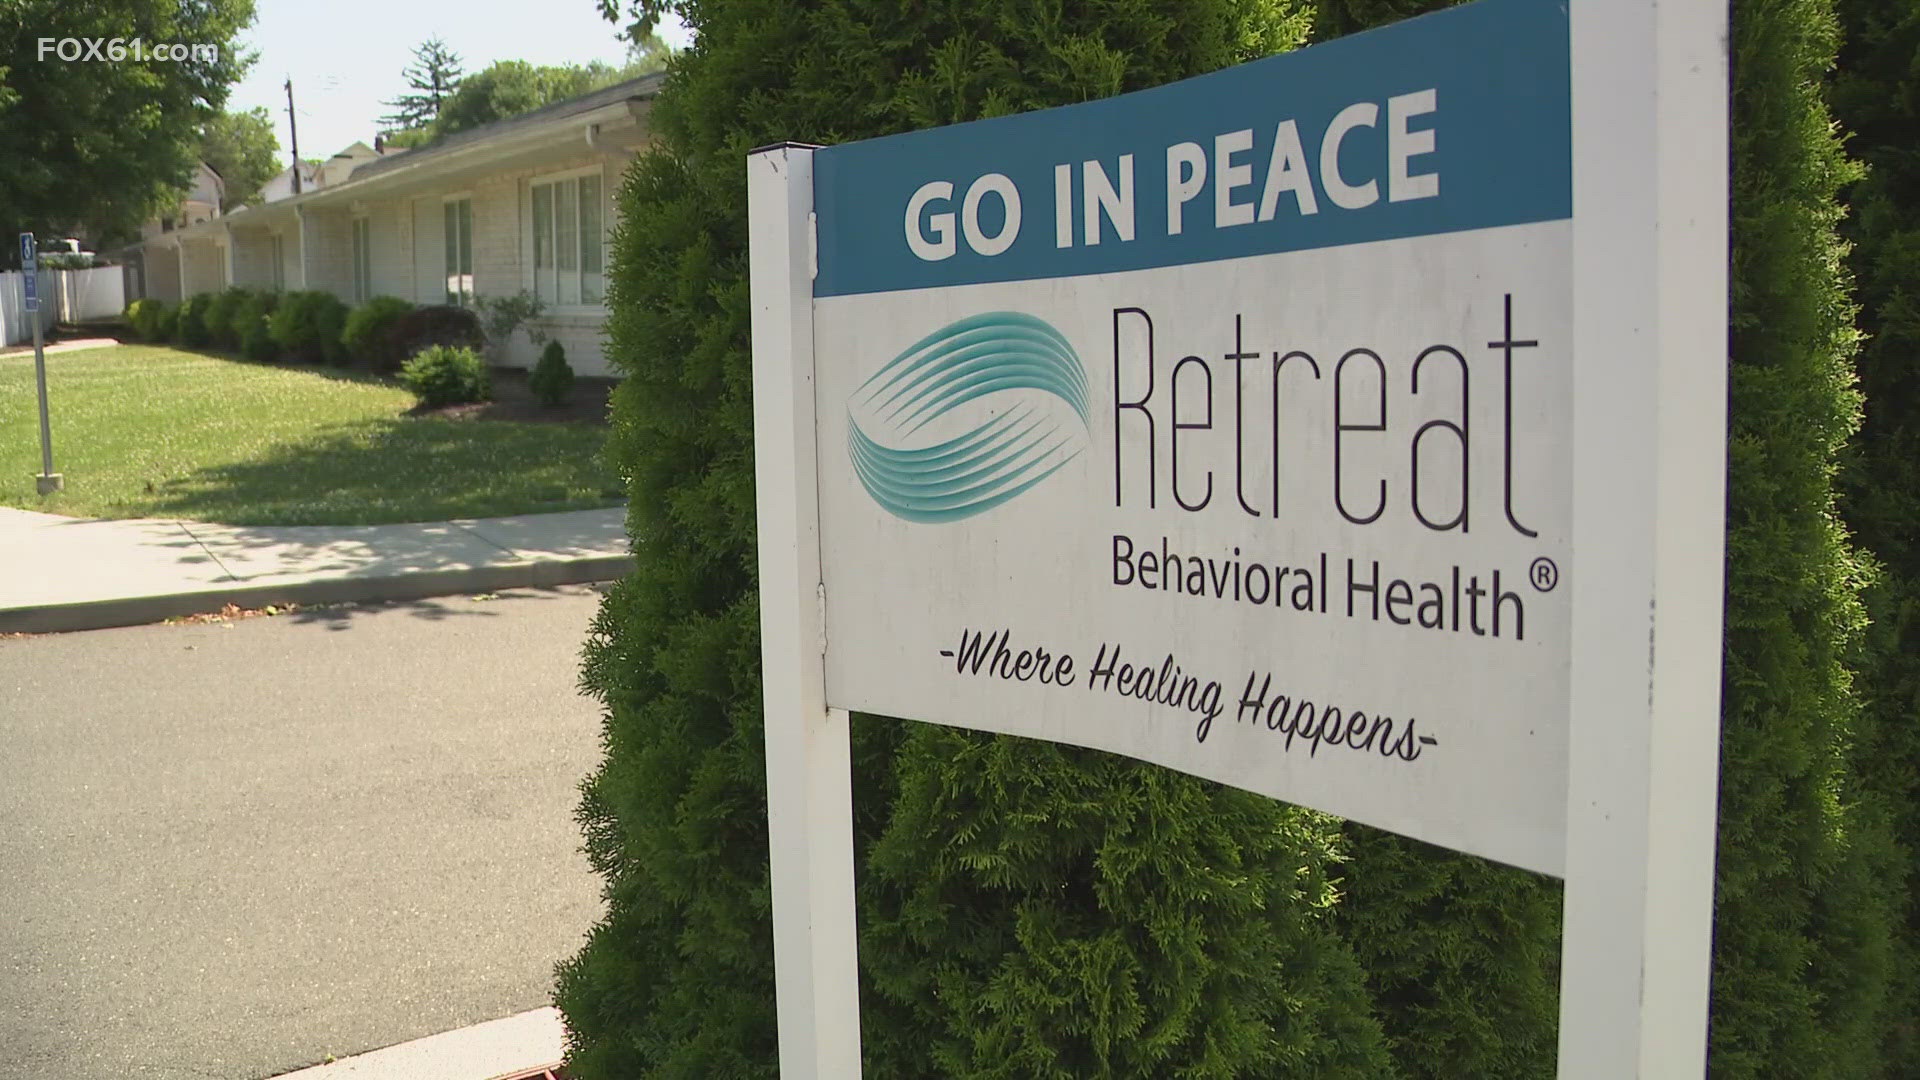 Retreat Behavioral Health has locations in Connecticut, Florida and Pennsylvania. Last week, the Conn. locations closed with no warning, leaving many questions.